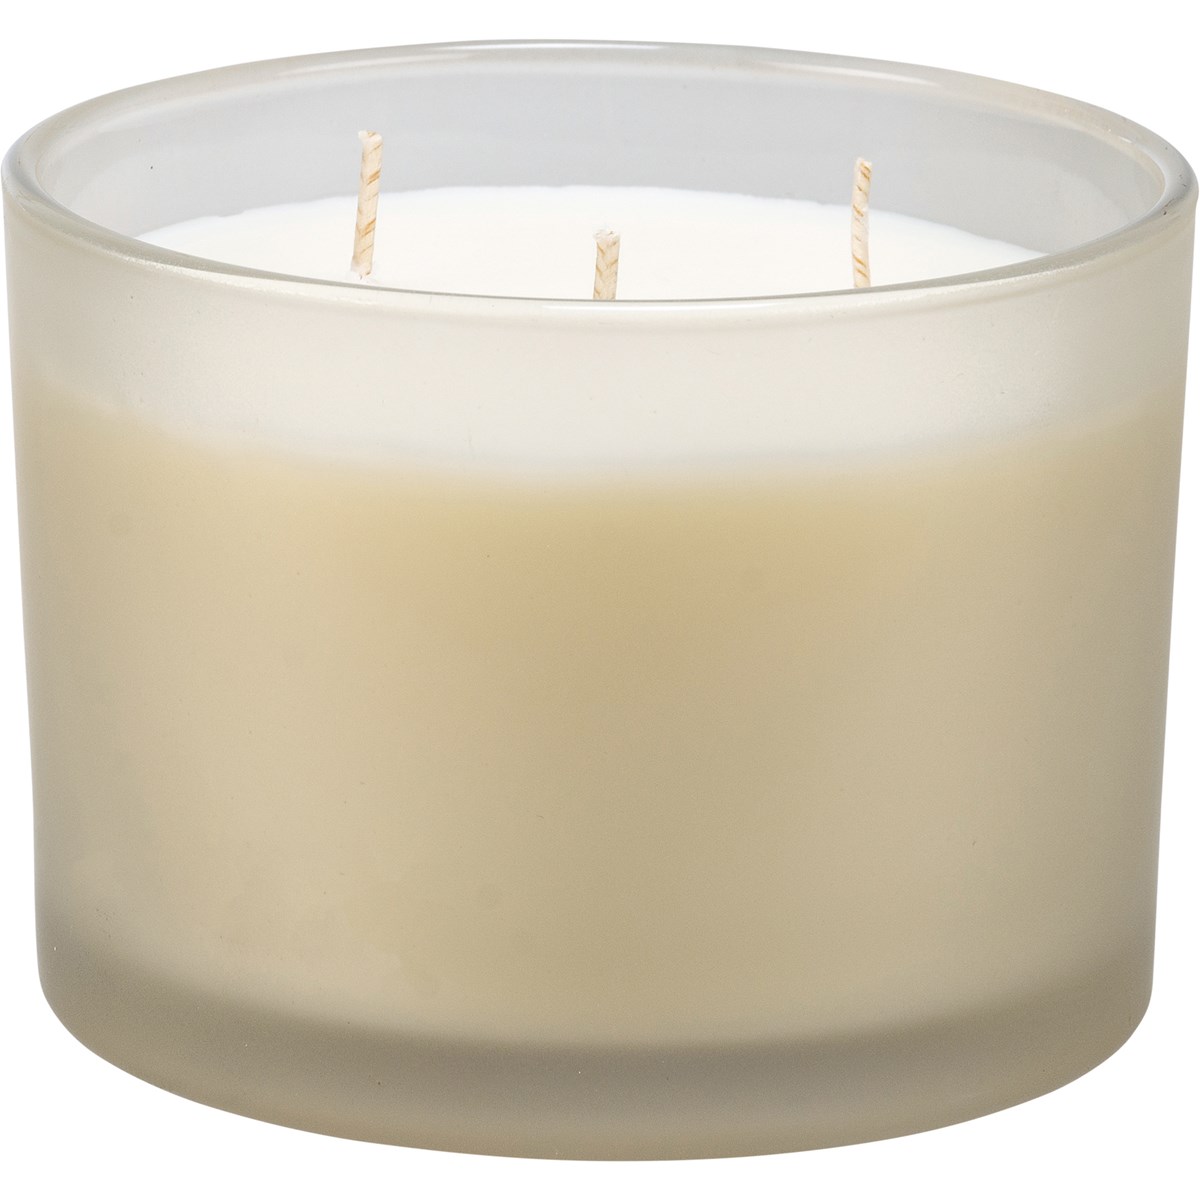 Because We Have Too Many Dogs Candle - Soy Wax, Glass, Cotton